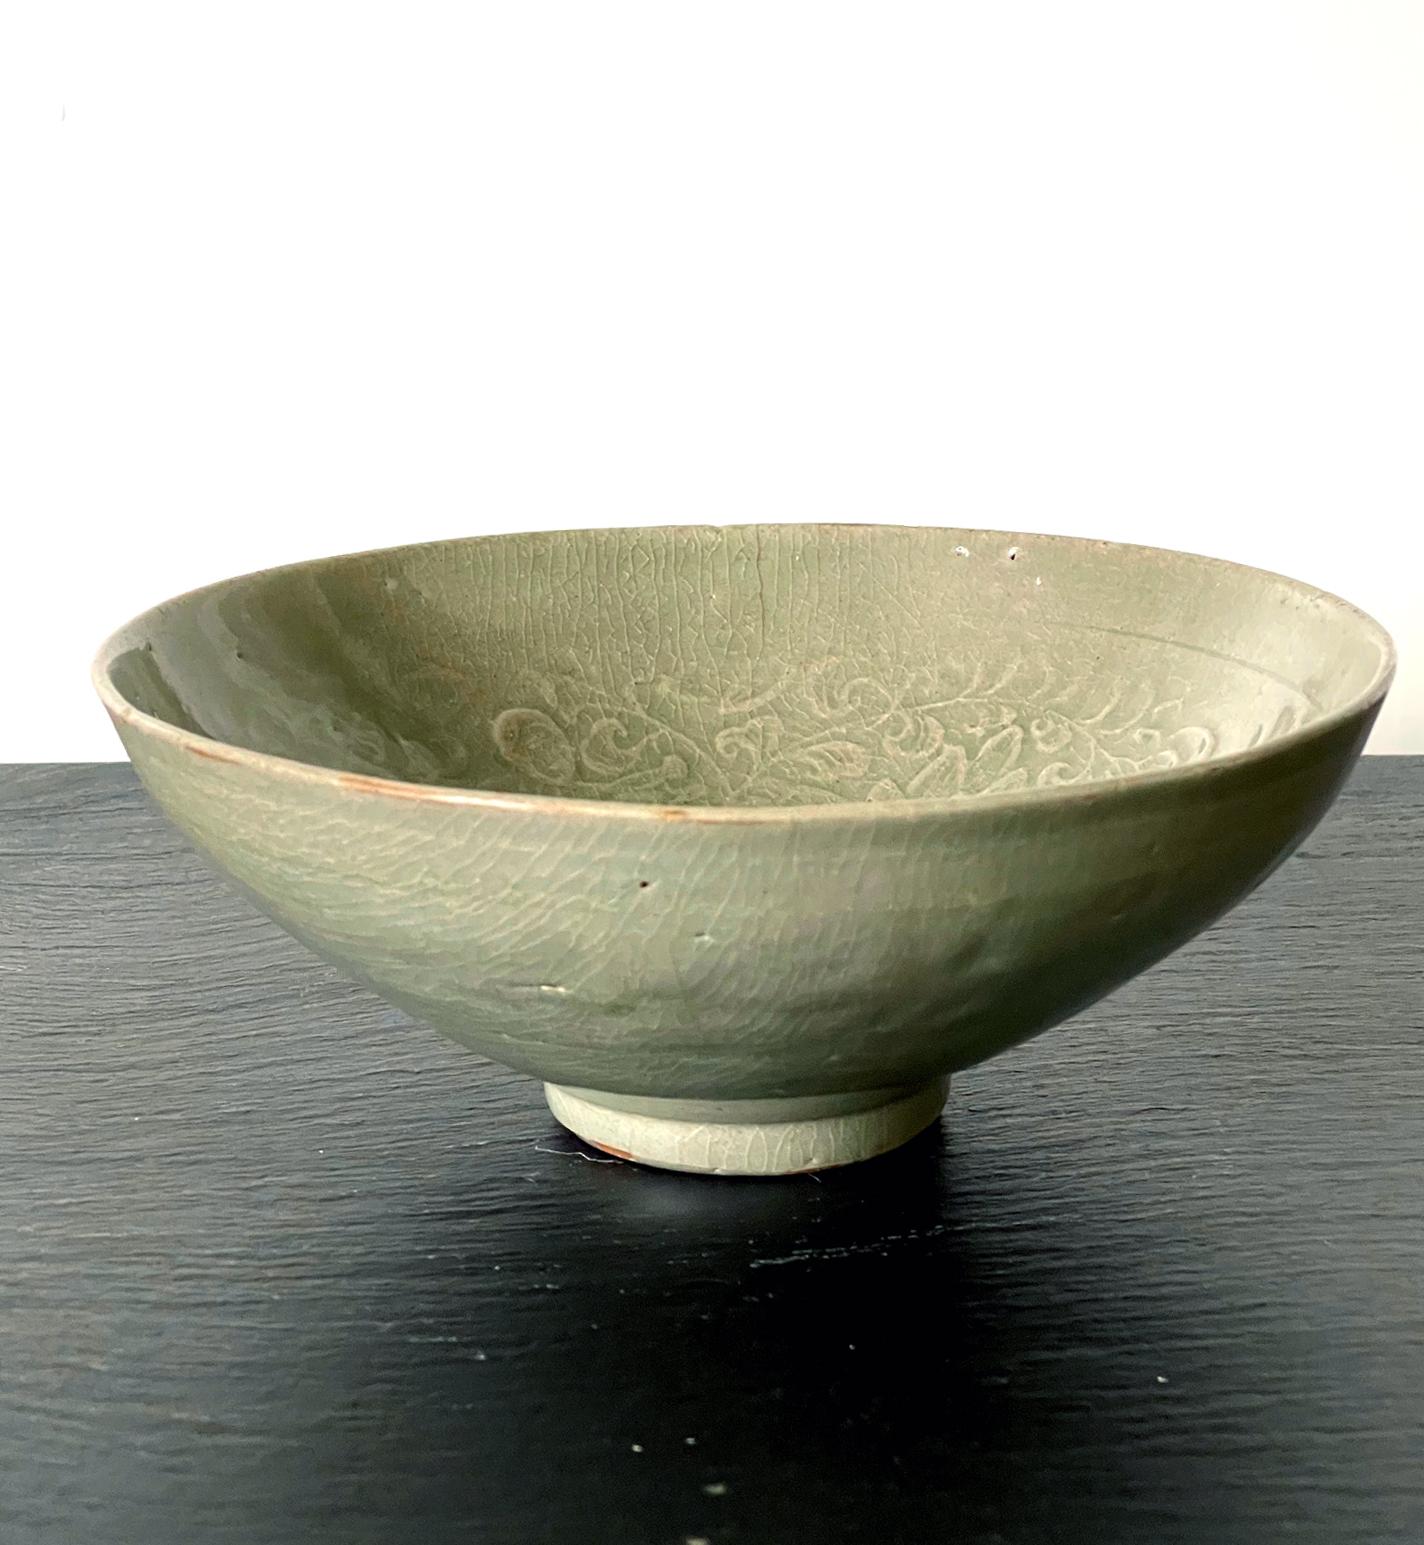 A Korean stoneware bowl from Goryeo dynasty circa 12th century. The conical form bowl with a small raised foot rim is covered in a celadon green glaze. Under the glaze, the interior is decorated with carved design of bands of scrolling foliage with